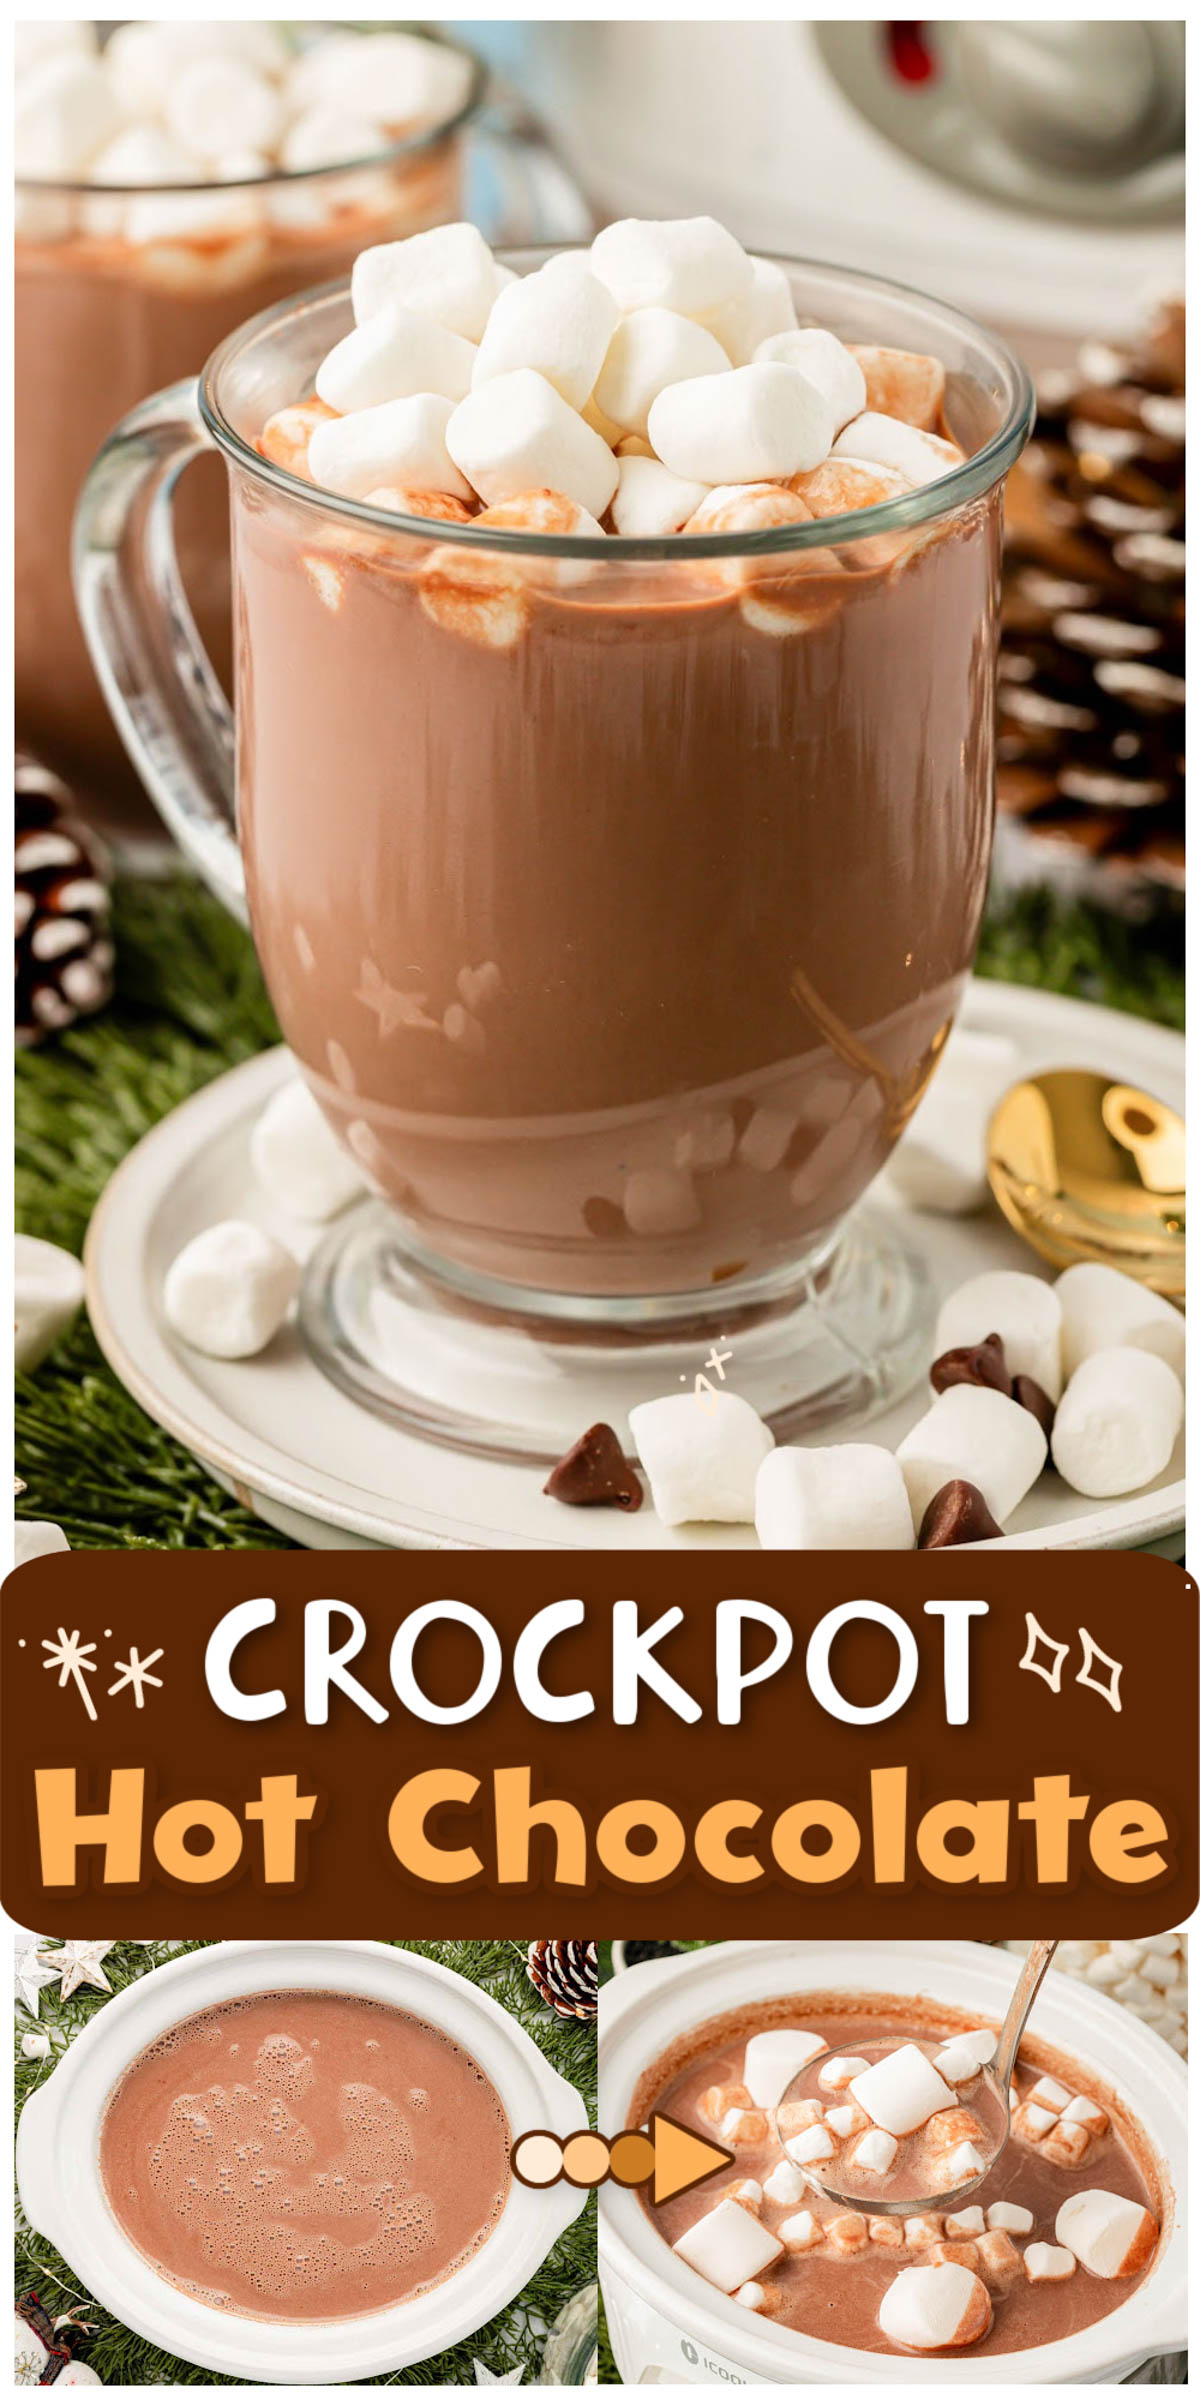 Crockpot Hot Chocolate is made with heavy cream, milk, sweetened condensed milk, chocolate, cocoa powder, and vanilla for the perfect hot drink for holiday parties and gatherings. via @sugarandsoulco